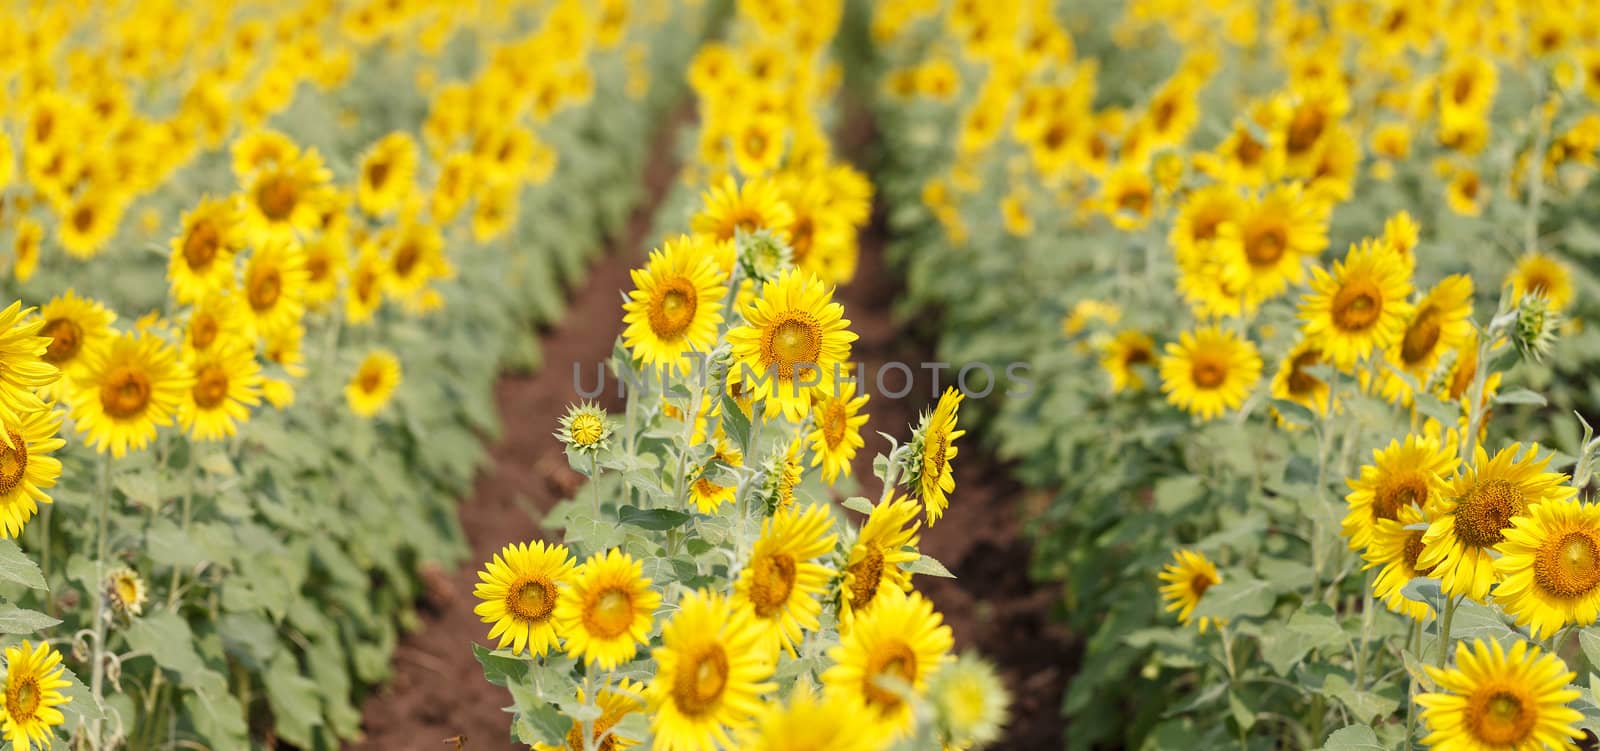 Detail of a field with many sunflowers in sunlight with shallow depth of field